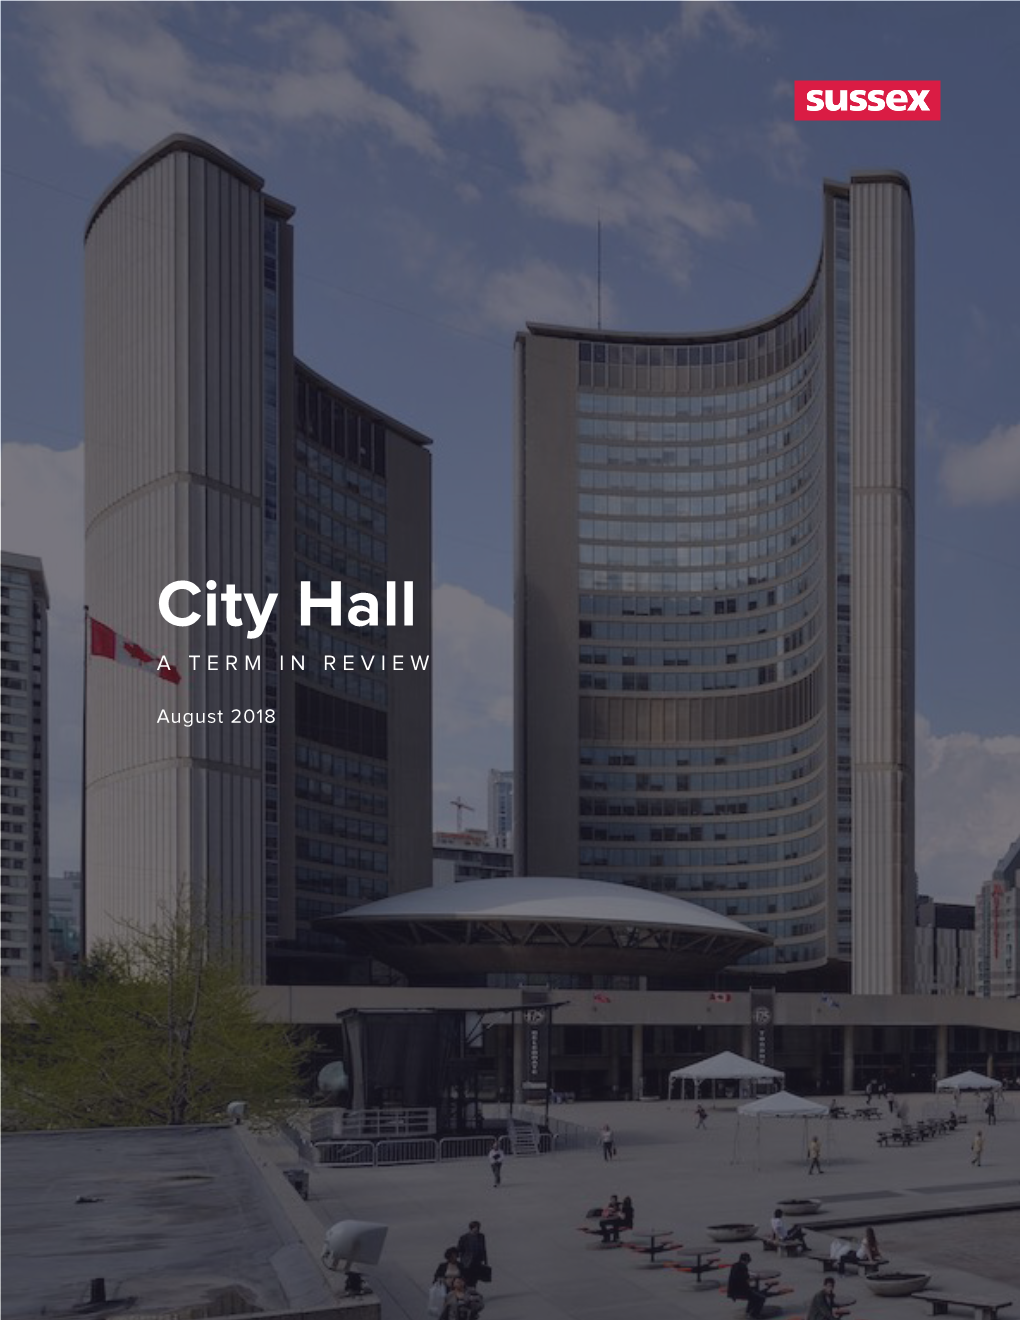 City Hall a TERM in REVIEW